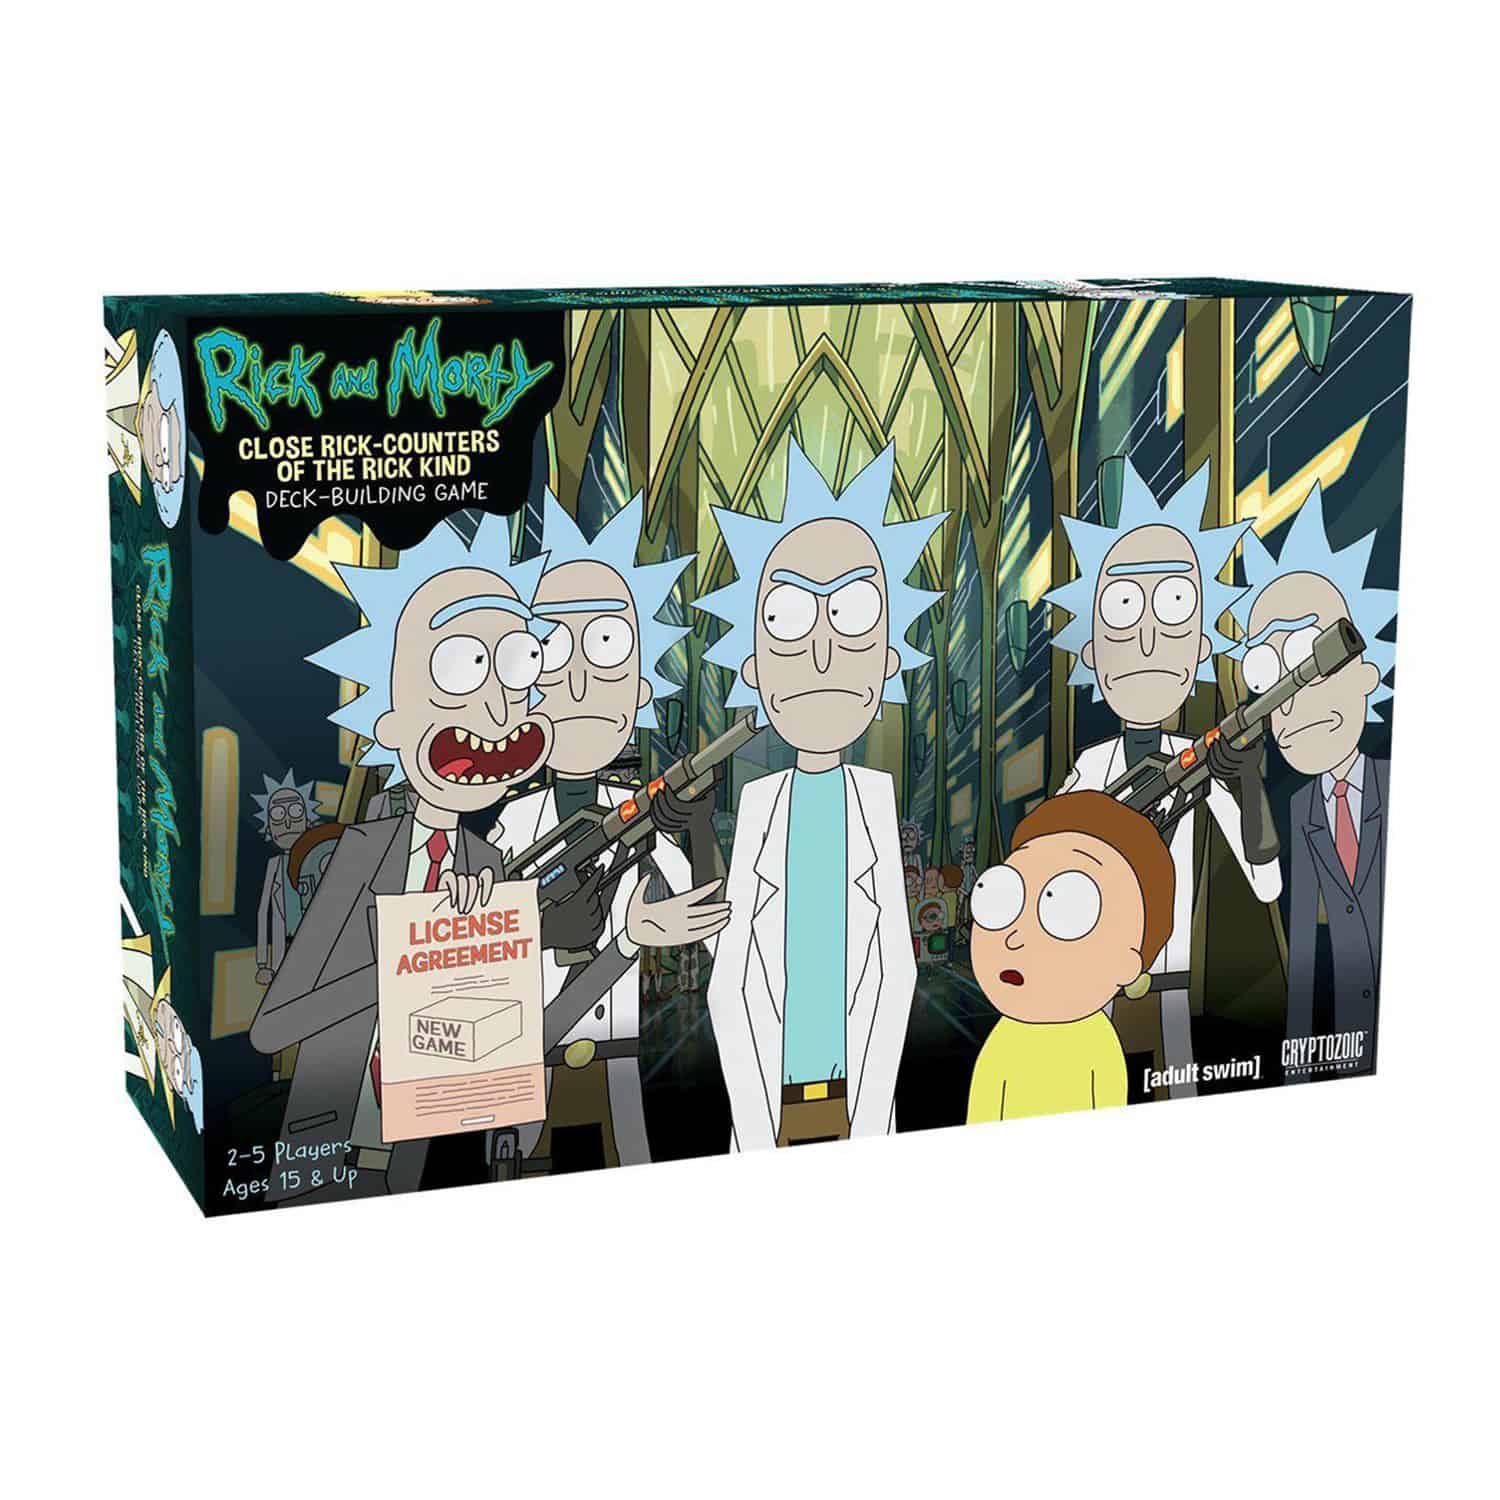 Rick and Morty - Deck Building Game